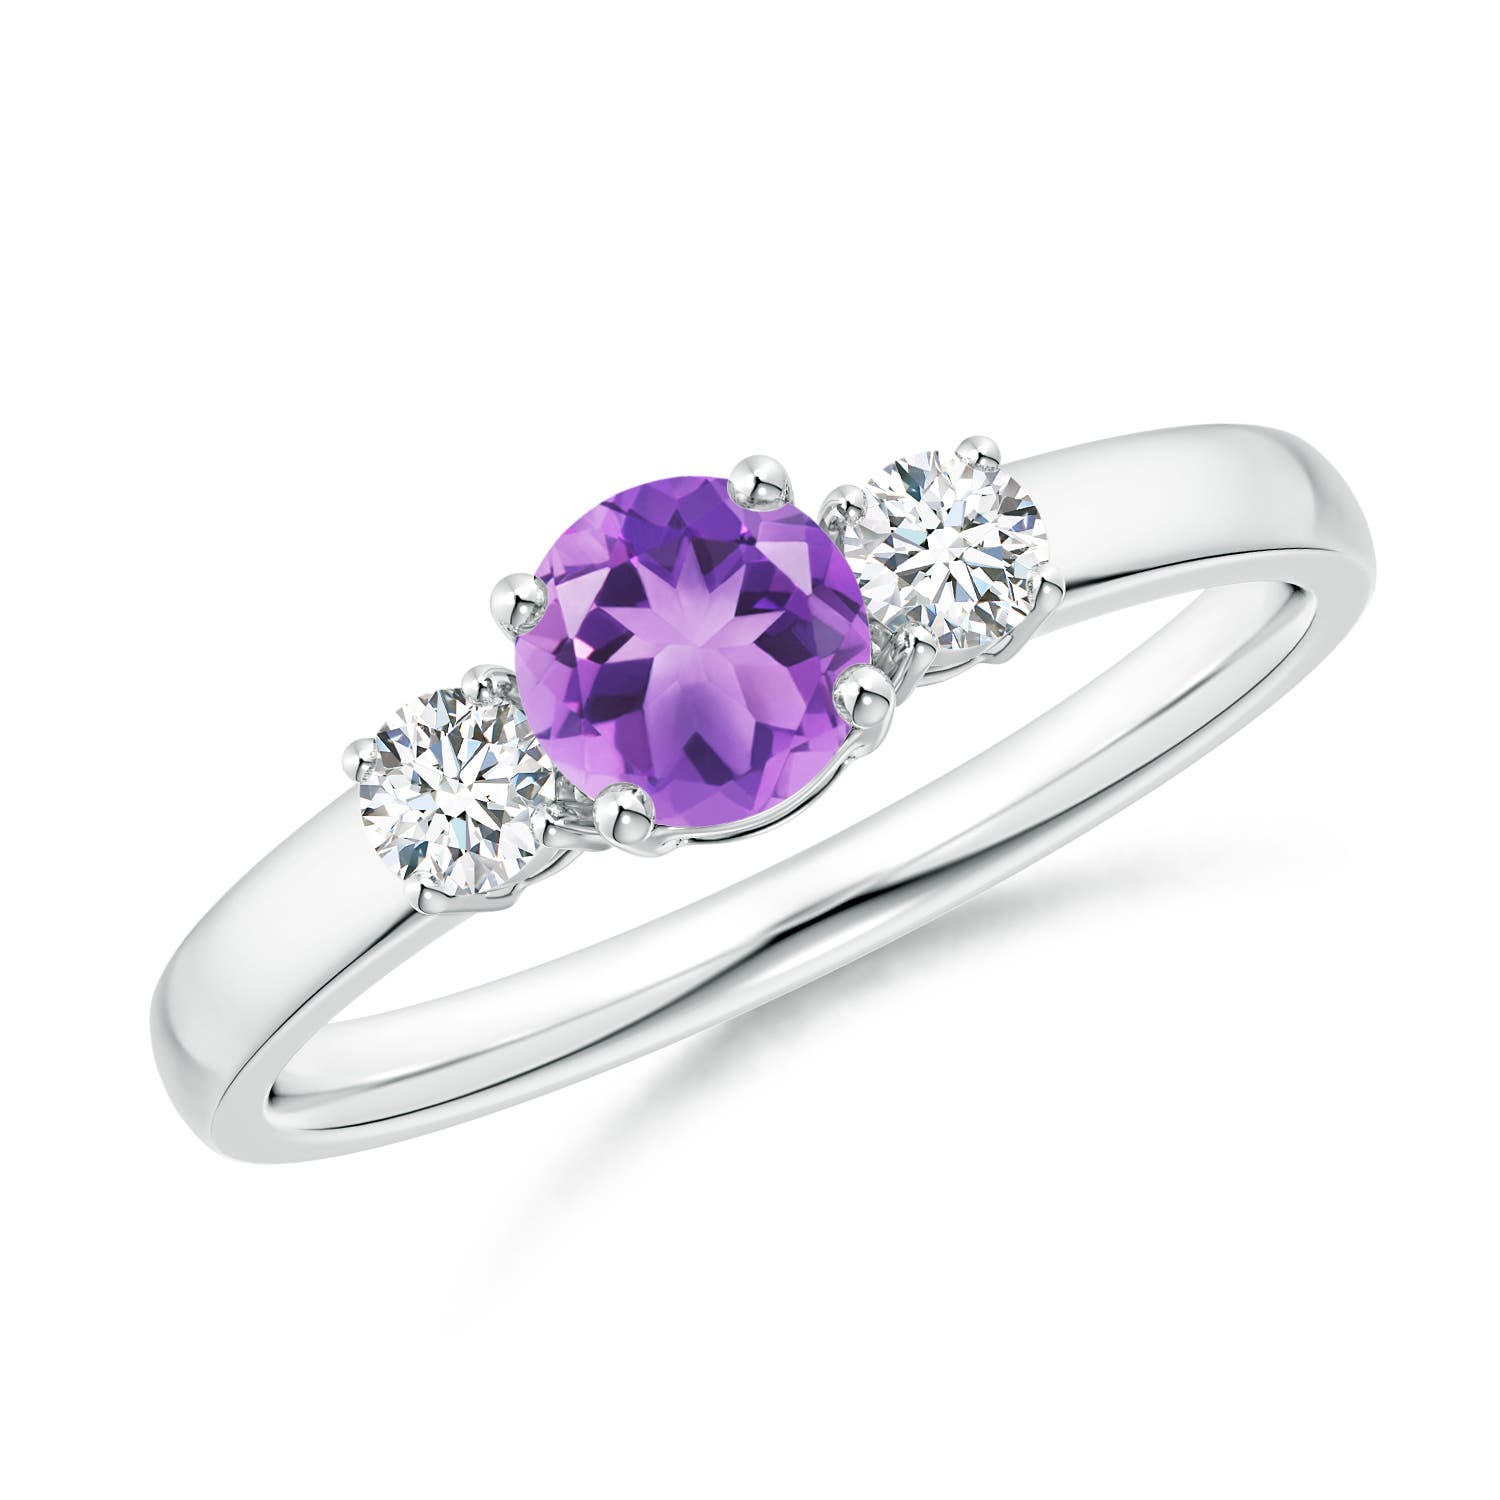 A - Amethyst / 0.66 CT / 14 KT White Gold